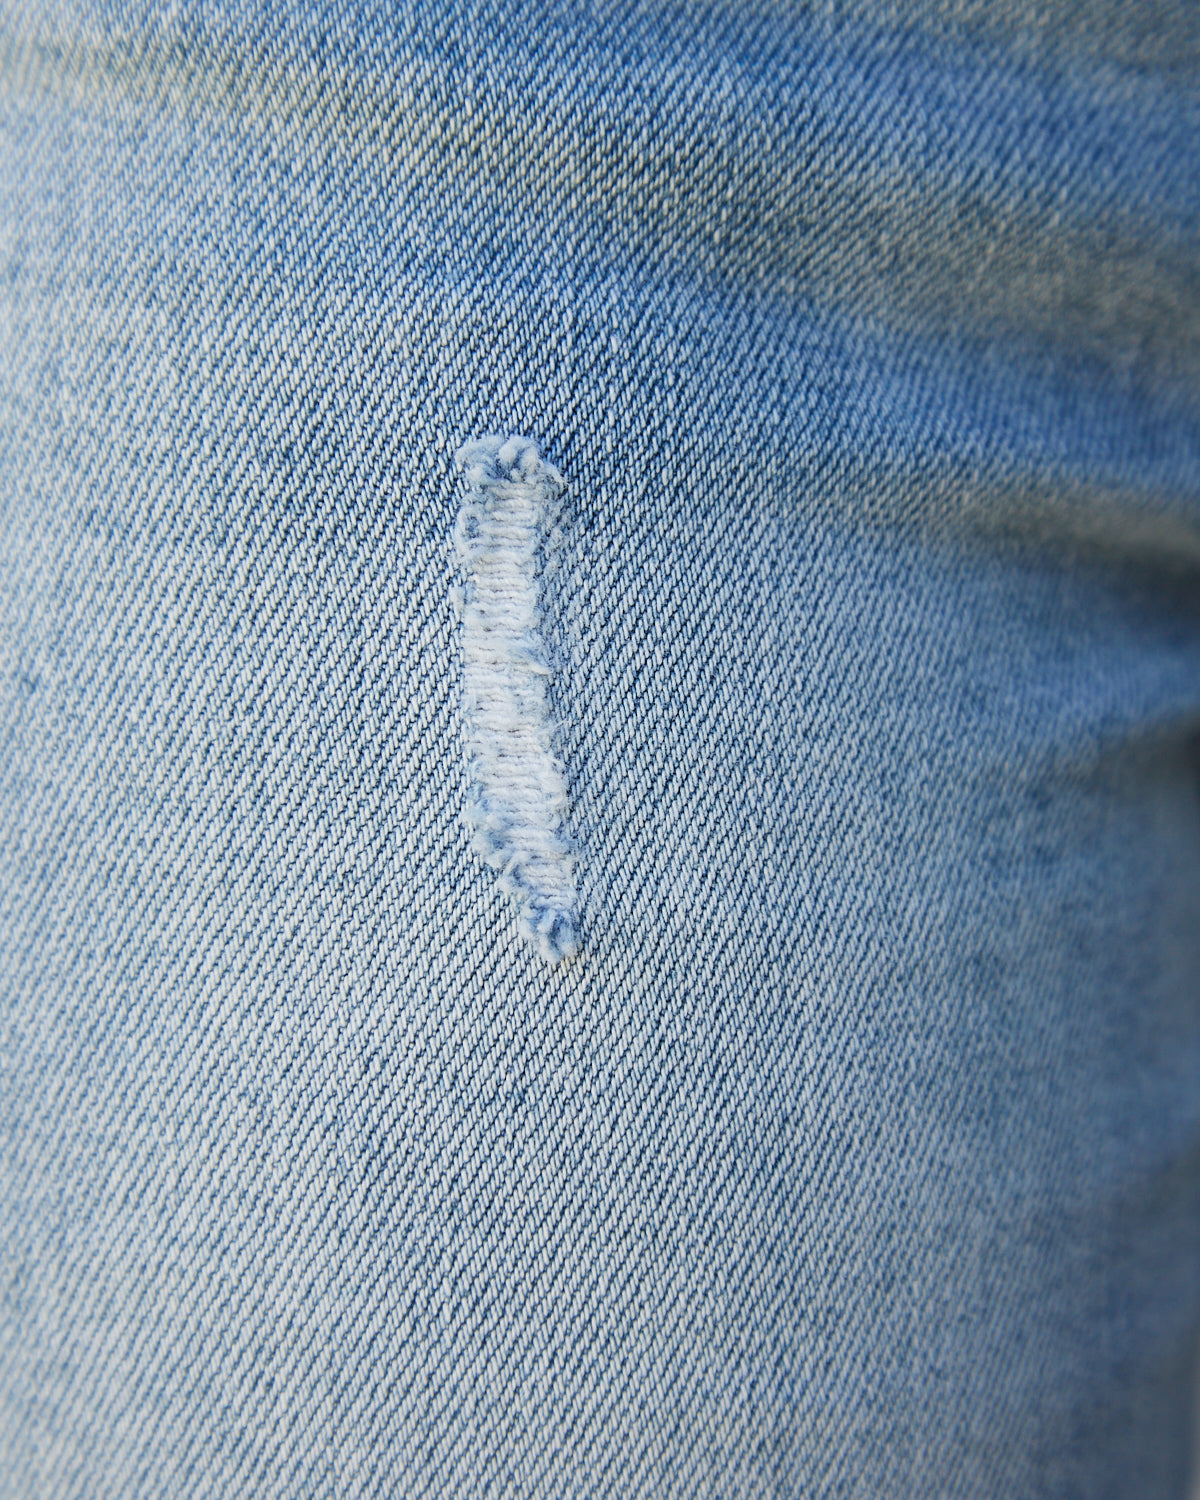 Close up of the charlee blue ripped jeans